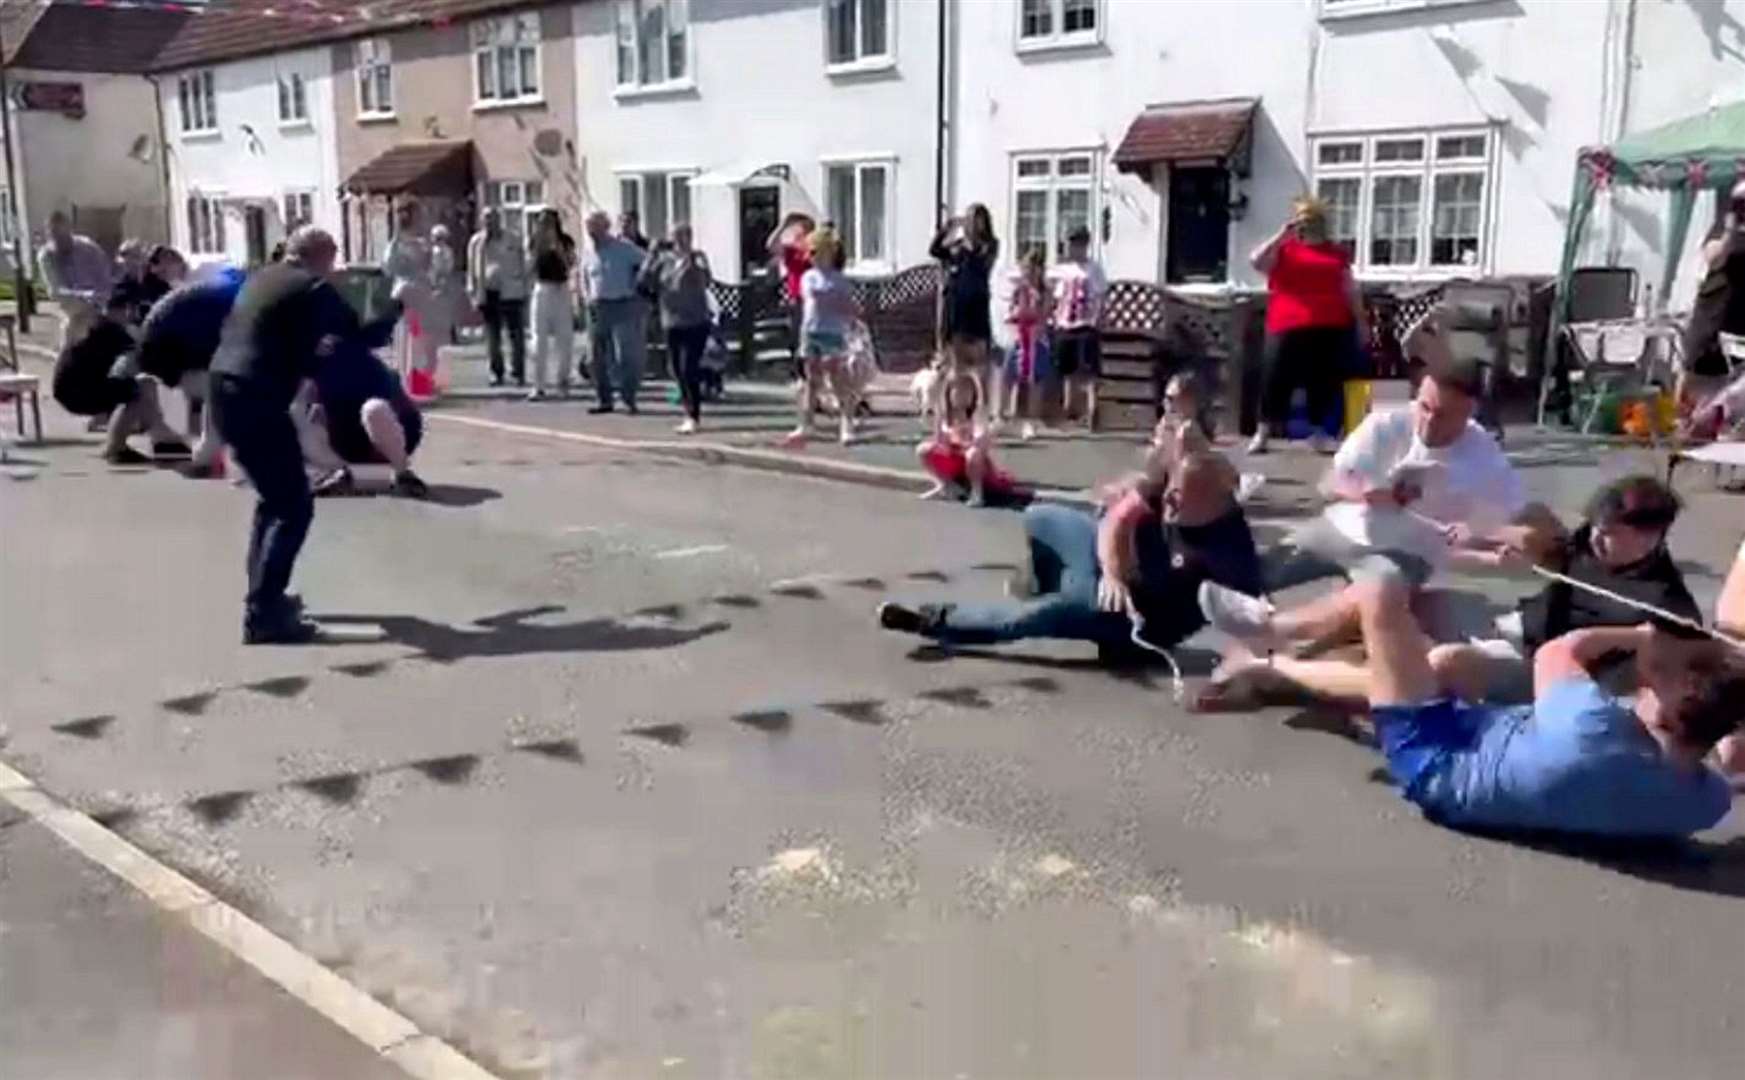 More than 10 men were left with sore elbows after a rope suddenly snapped during their game of tug-of-war. Picture: SWNS